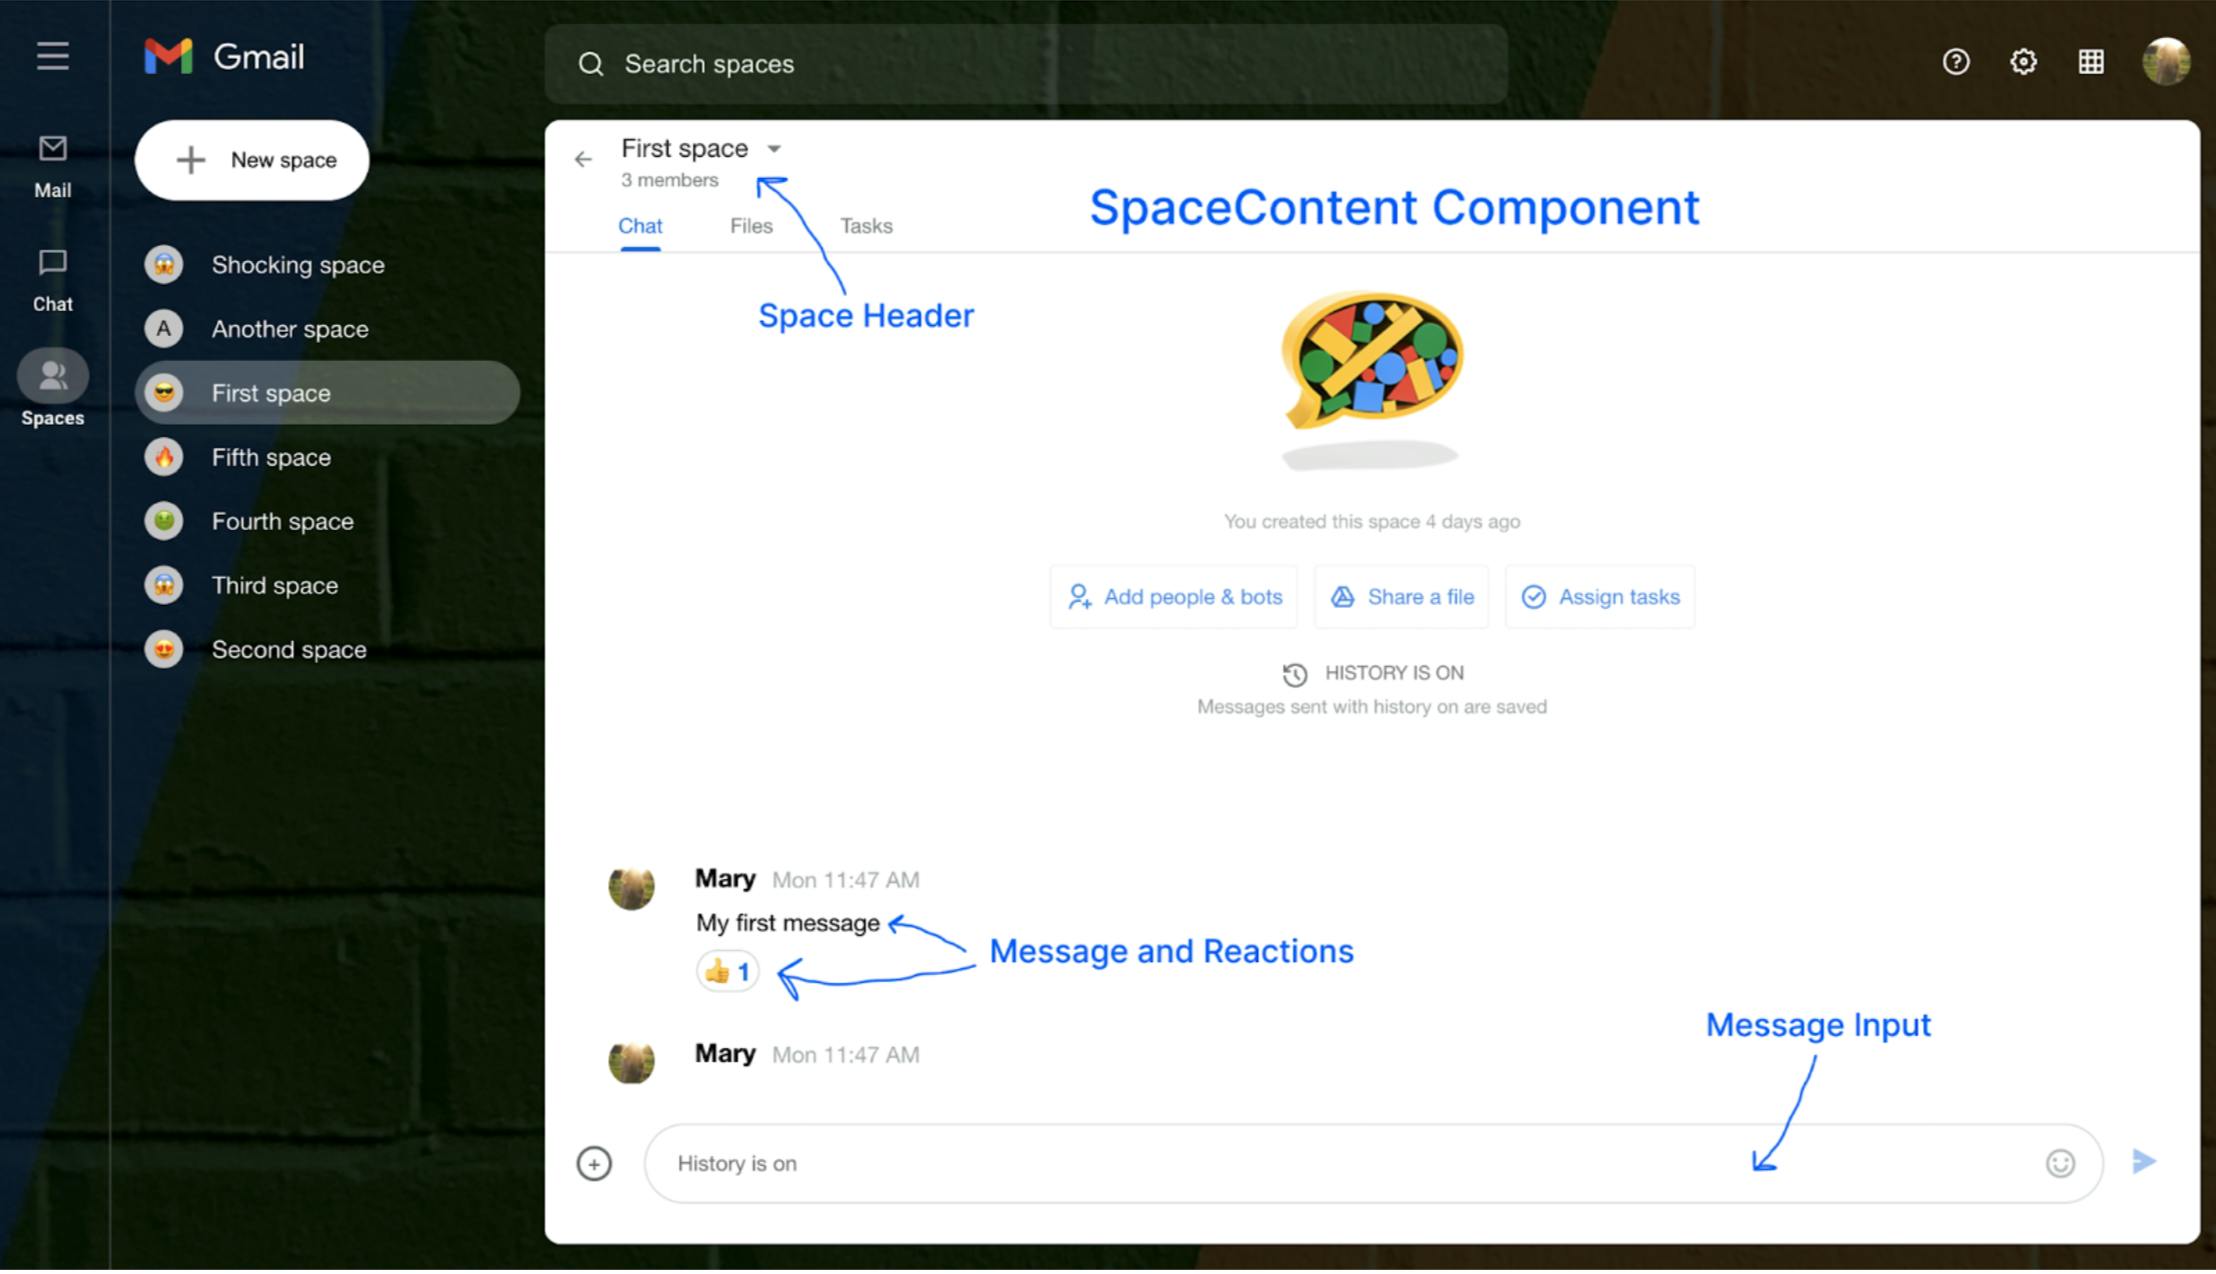 SpaceContent Component reader will build